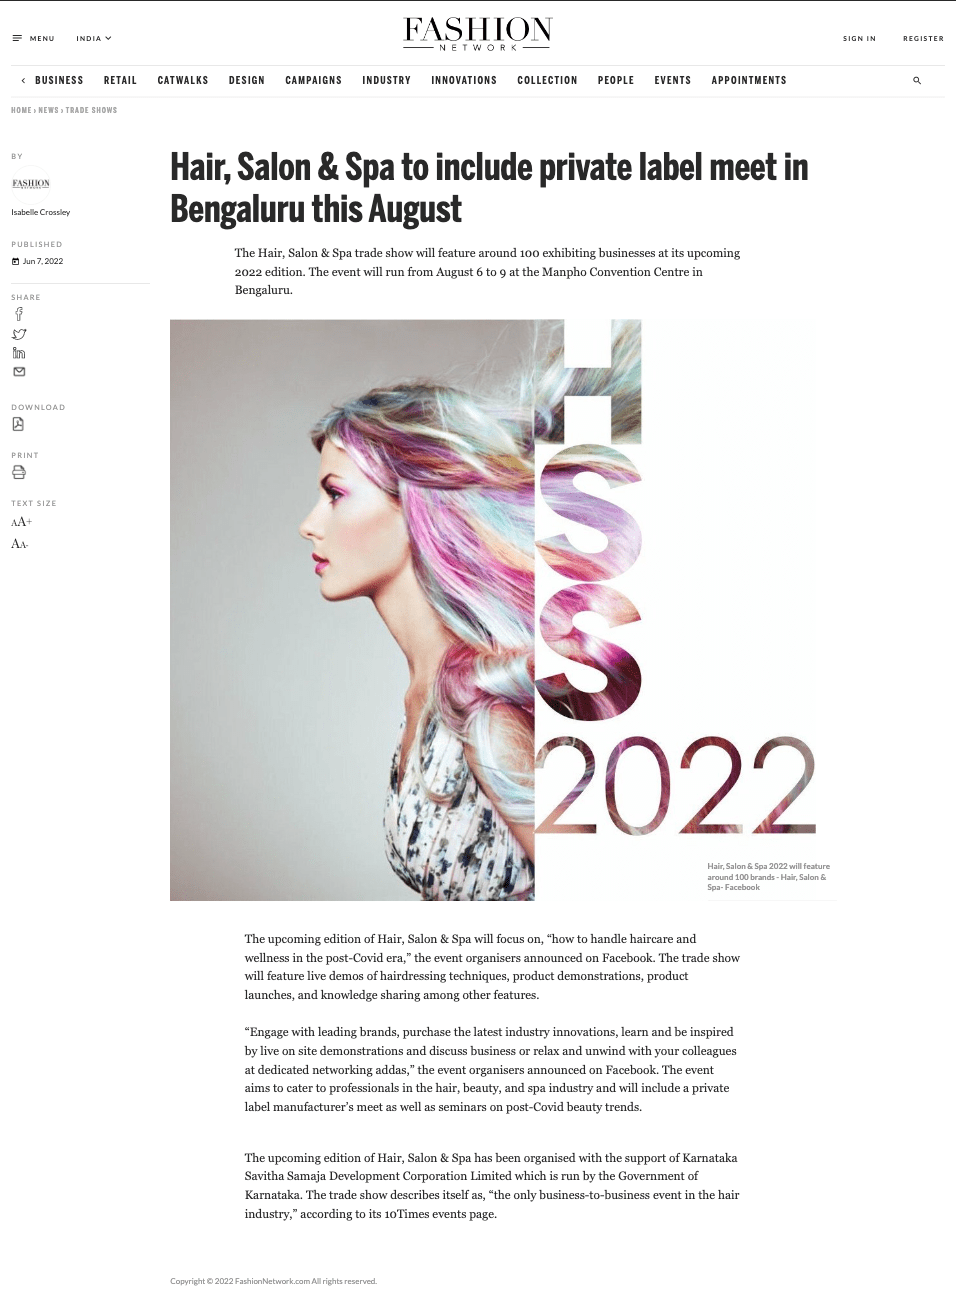 HSS2022 Featured in FASHION NETWORK